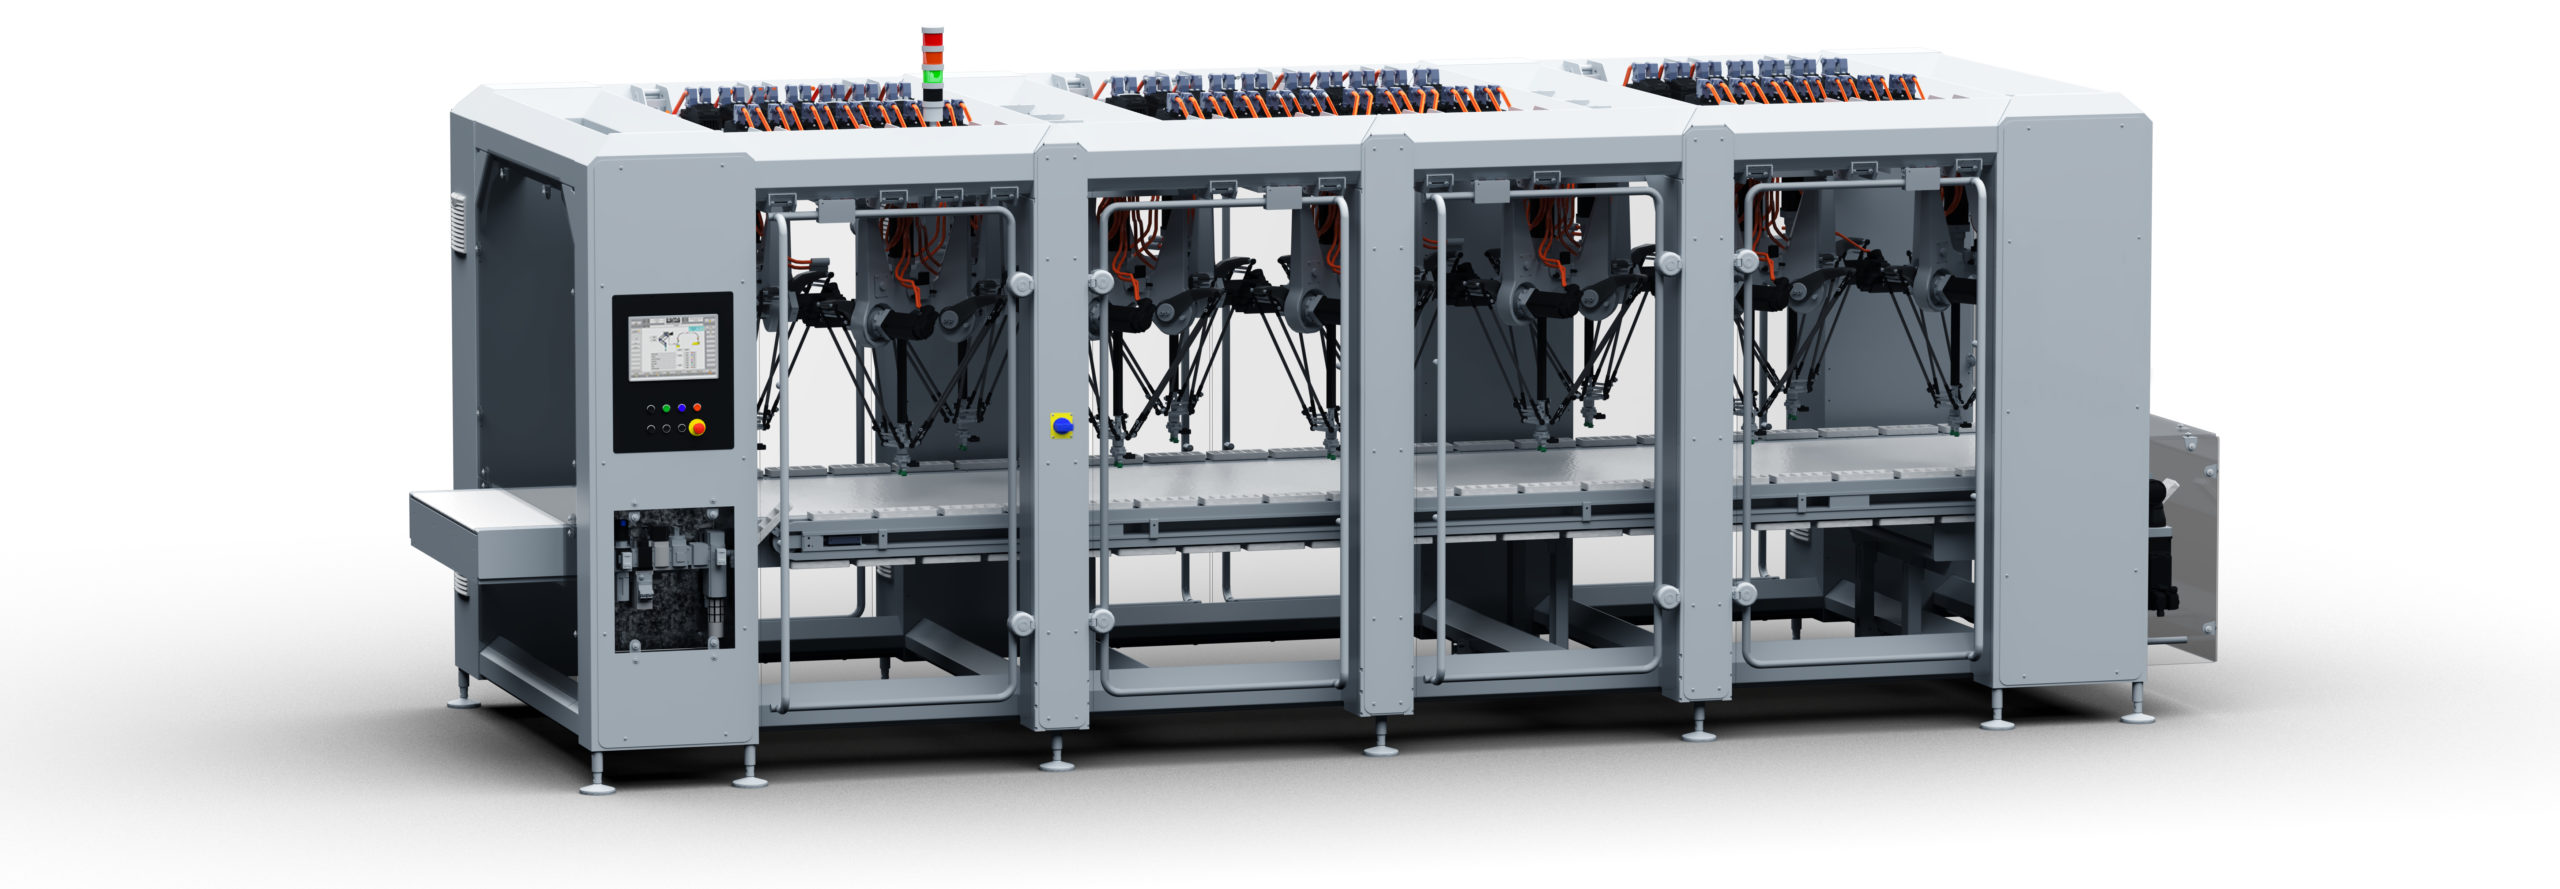 Cama offers flexibility from top-loading secondary packaging machines